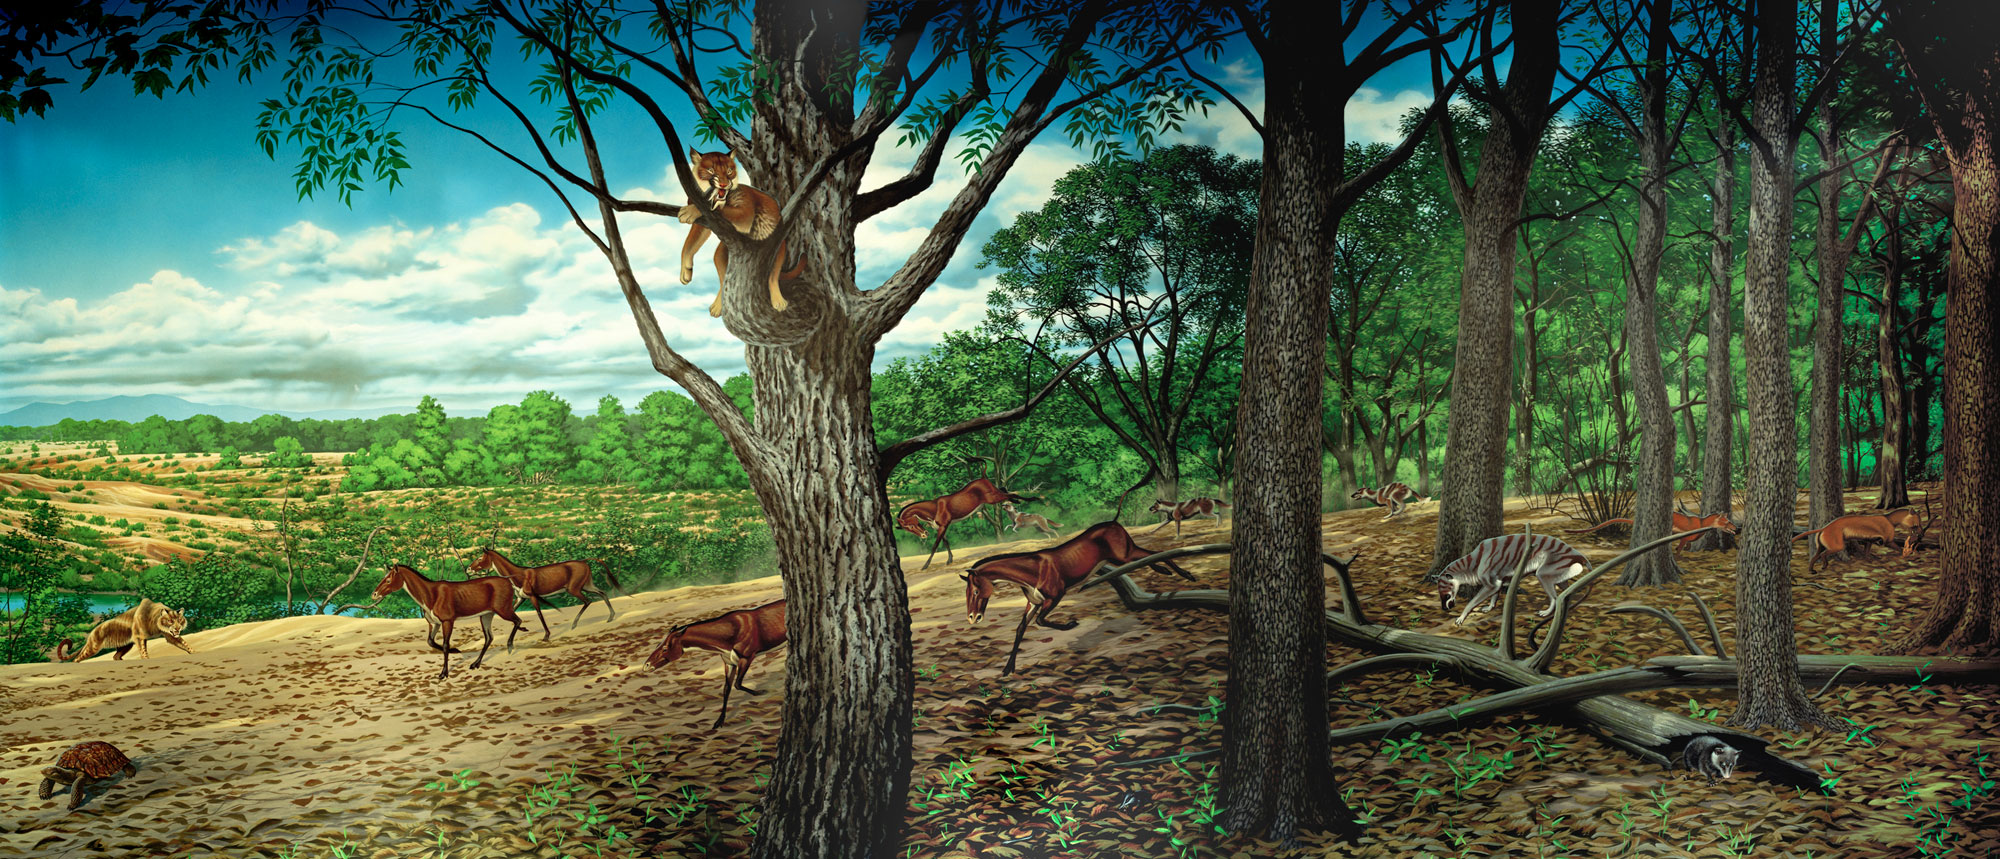 Mural of the Turtle Cover Member fauna and flora from the Oligocene of Oregon. In the picture, a forest grades into an open savanna or grassland. Horses and other herbivores can bee seen in the forest and grassland. A saber-toothed cat sits in a tree.